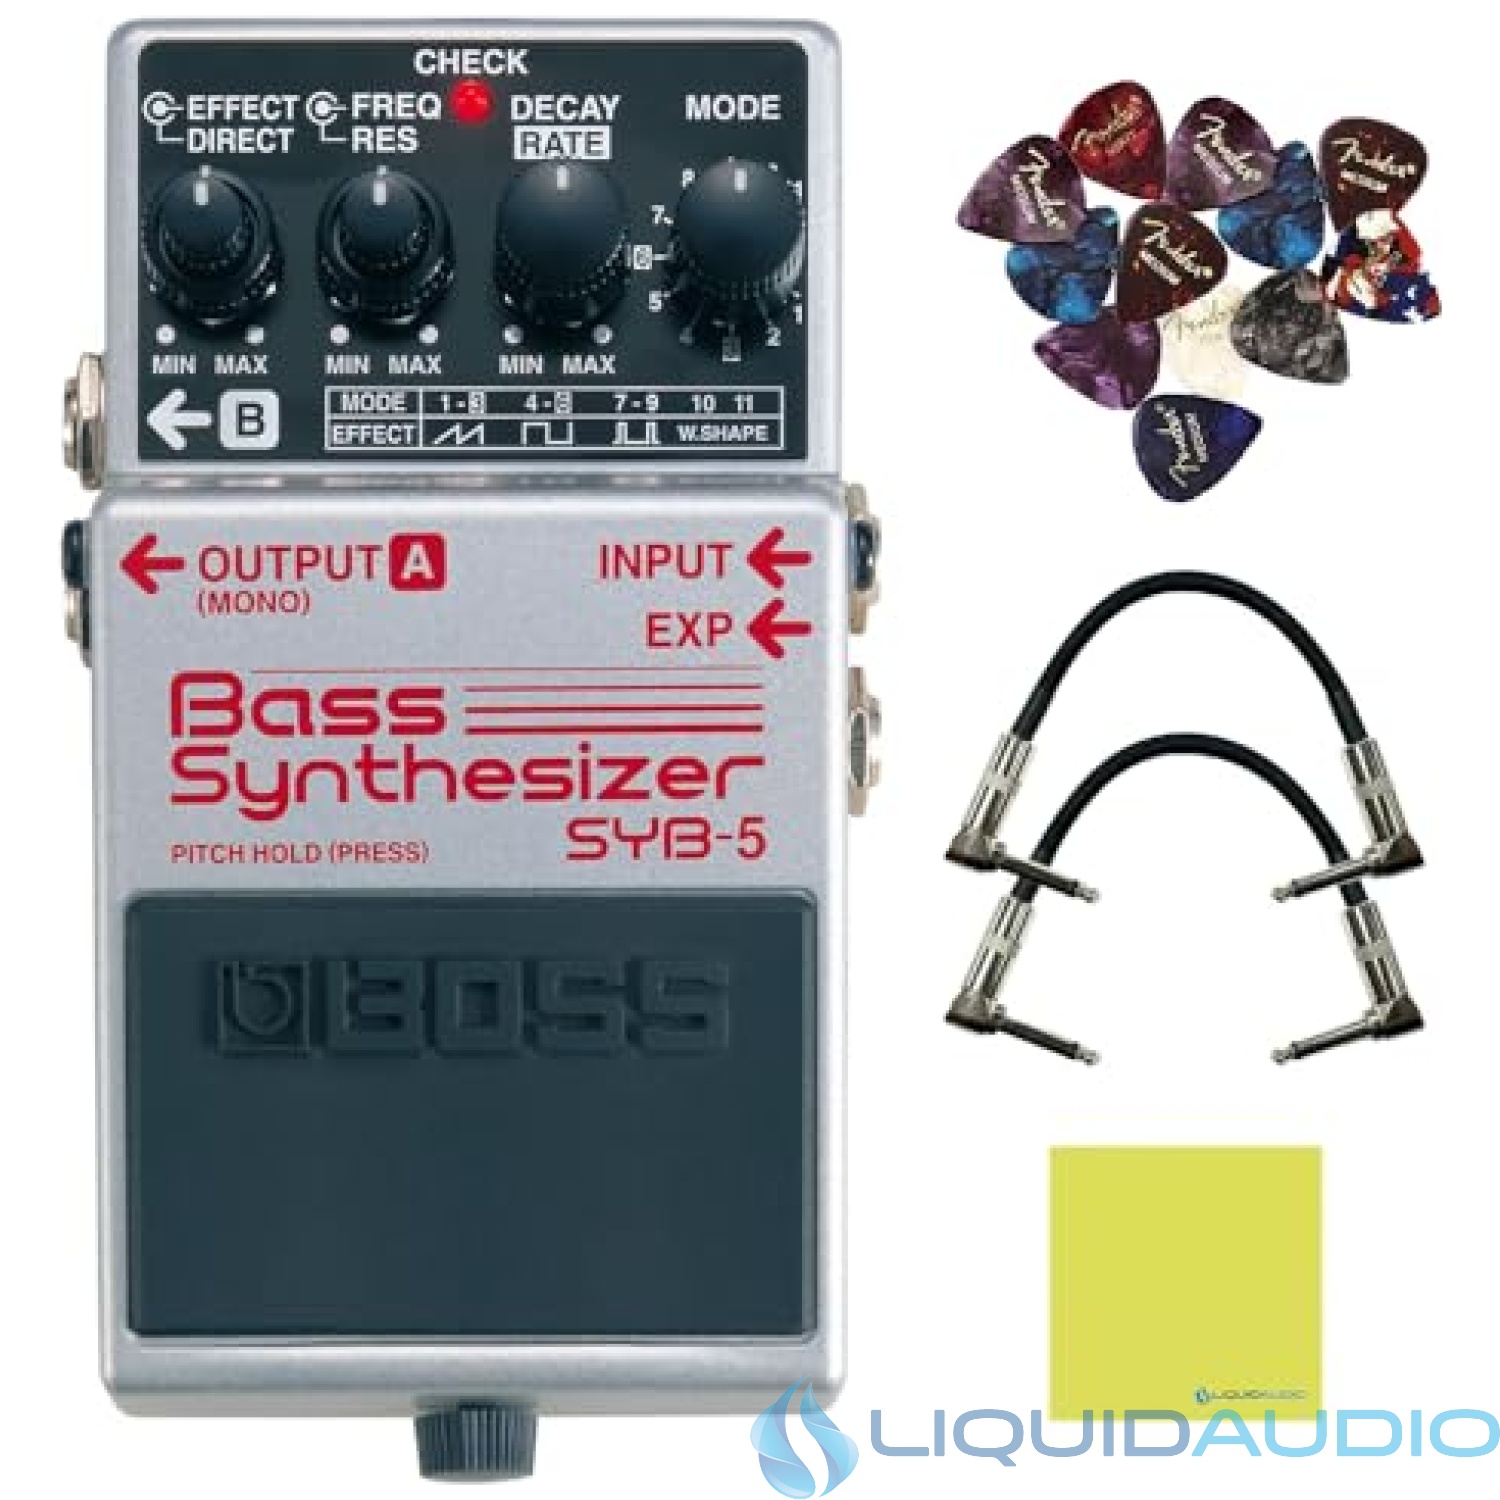 Boss SYB-5 Bass Synthesizer Pedal Bundle w/2x Strukture S6P48 Woven Right Angle Patch Cables, 12x Guitar Picks and Liquid Audio Polishing Cloth